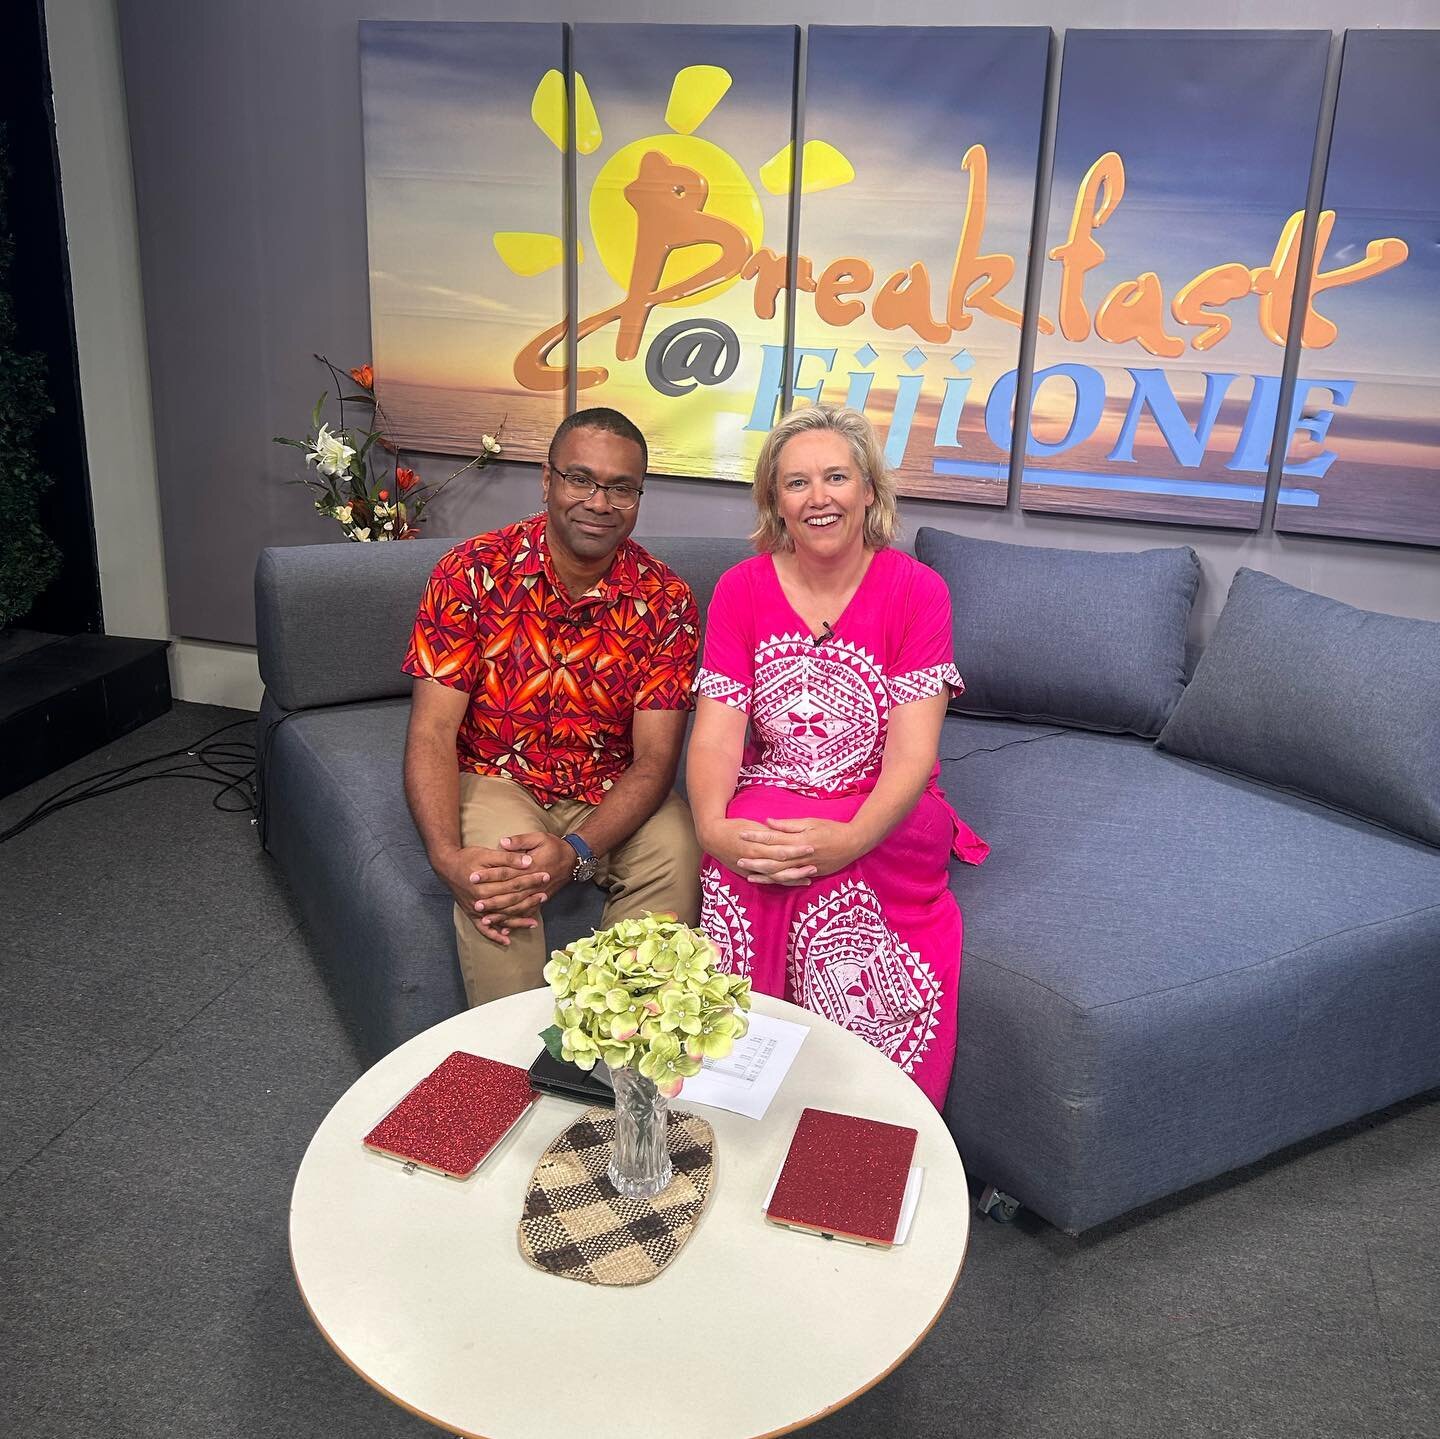 It was an enjoyable, last minute addition to the trip to be on FijiTV at breakfast time. TV is fun! It&rsquo;s basically just talking so it&rsquo;s fine. 

Fiona answered the host&rsquo;s questions and spoke about the charity and Fijian culture. 

Vi